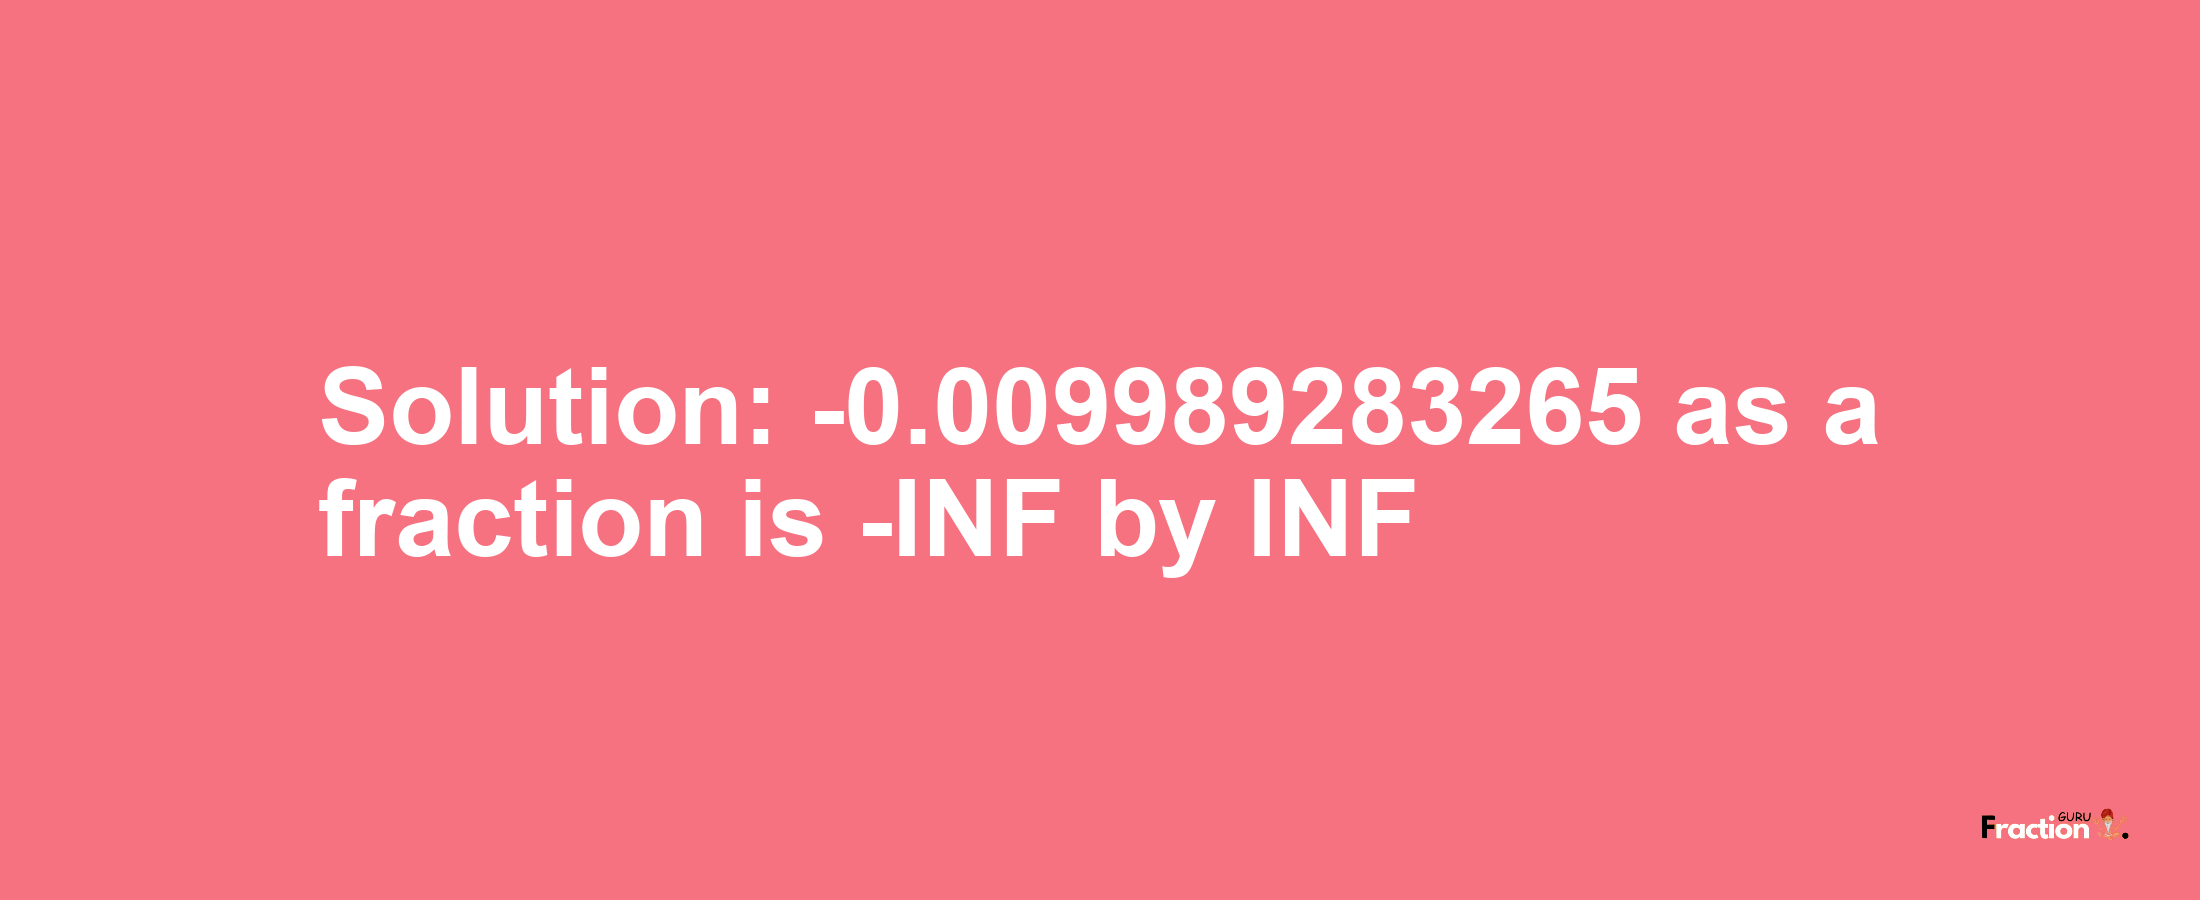 Solution:-0.009989283265 as a fraction is -INF/INF